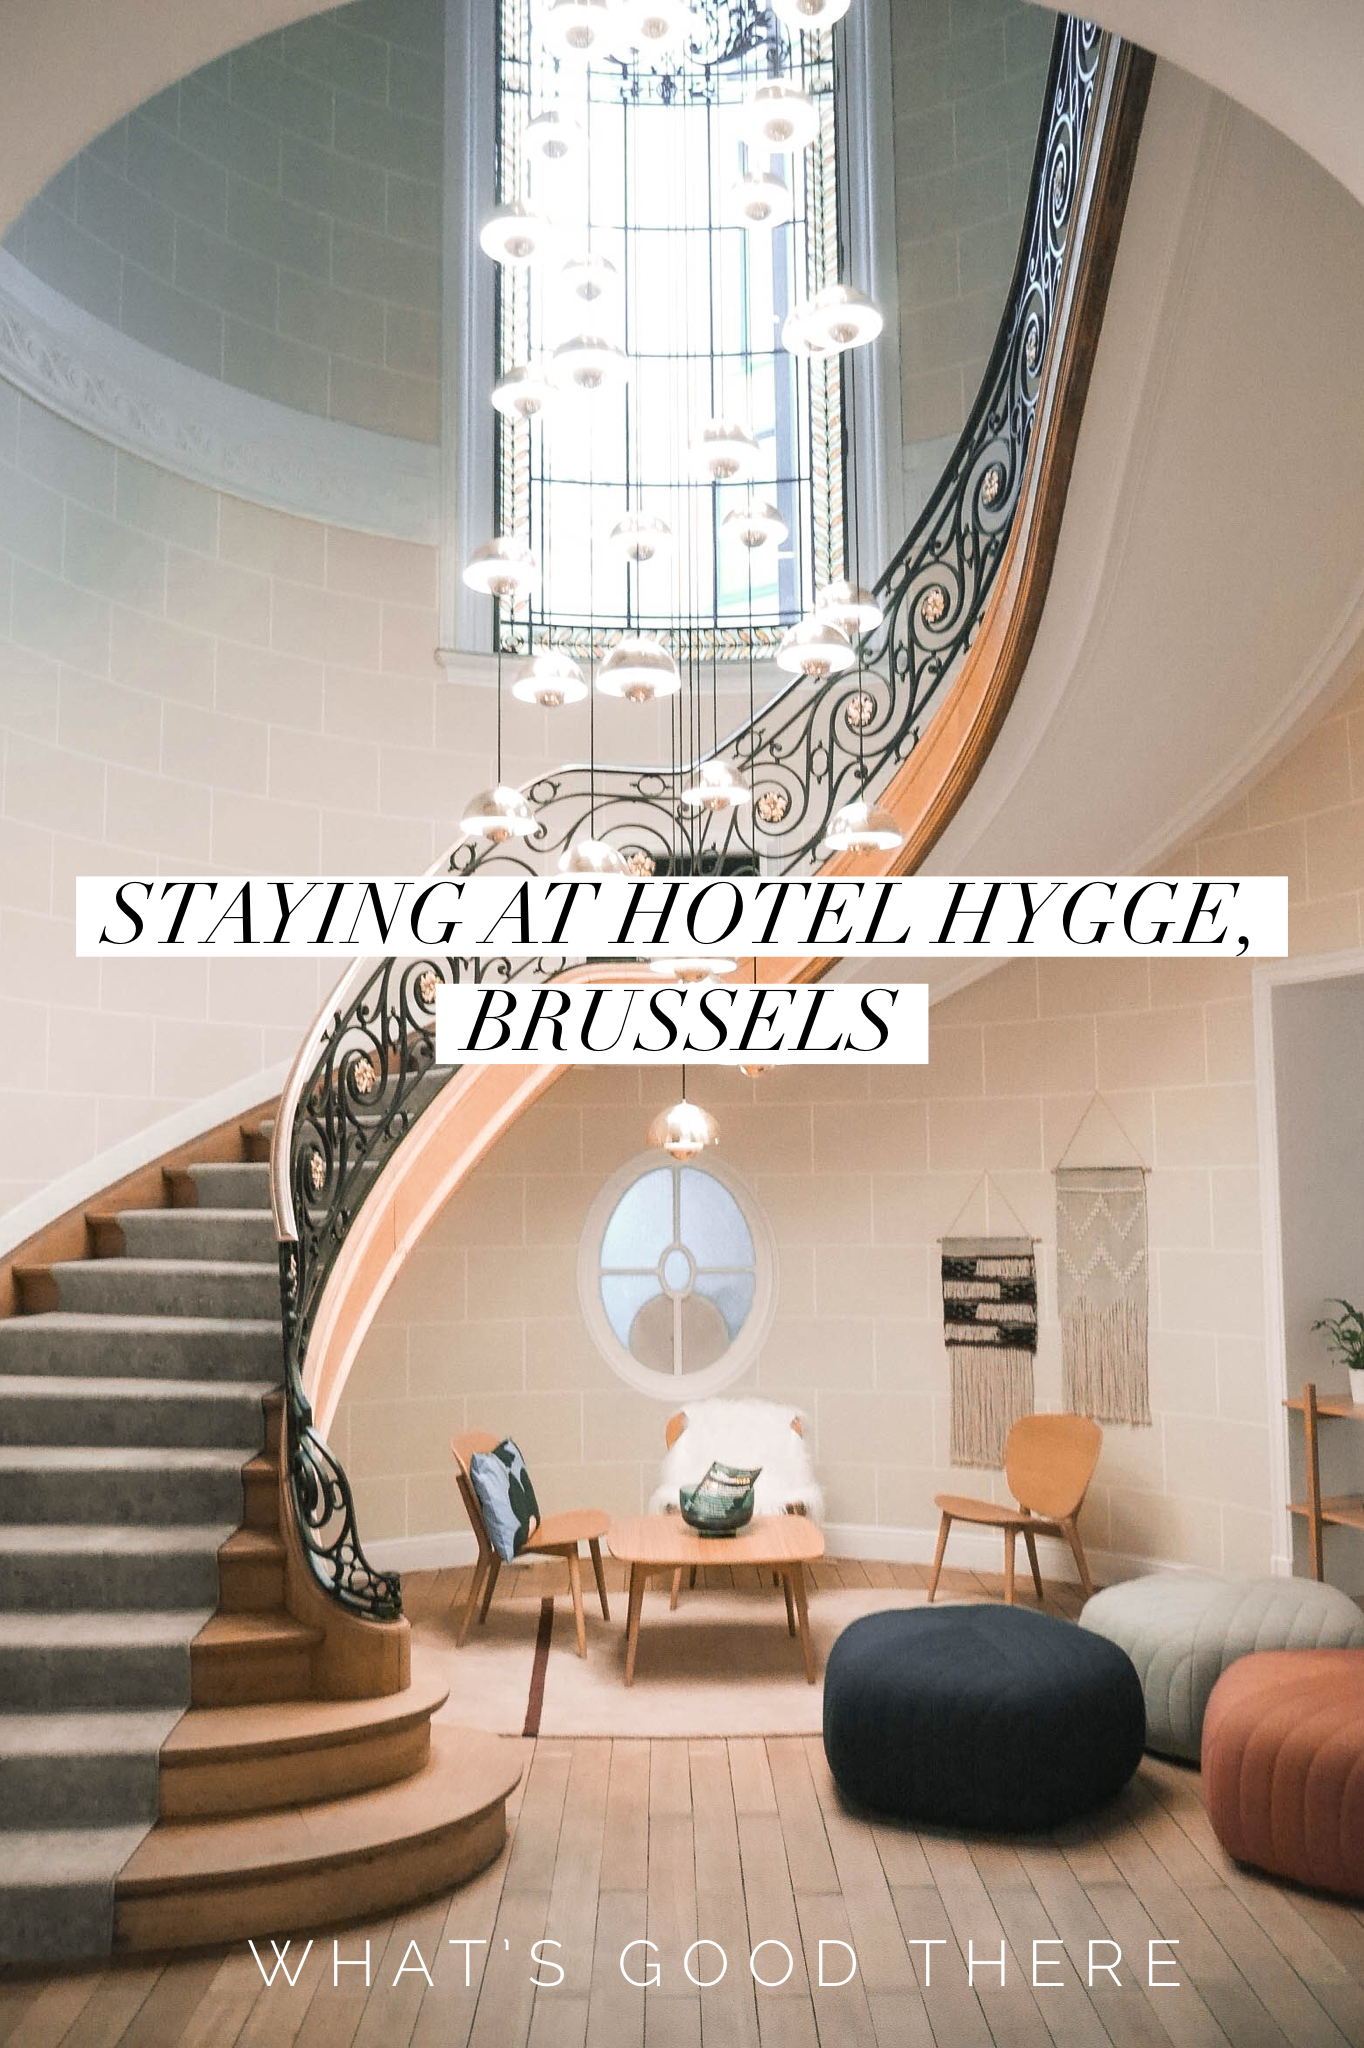 Staying at Hotel Hygge, Brussels